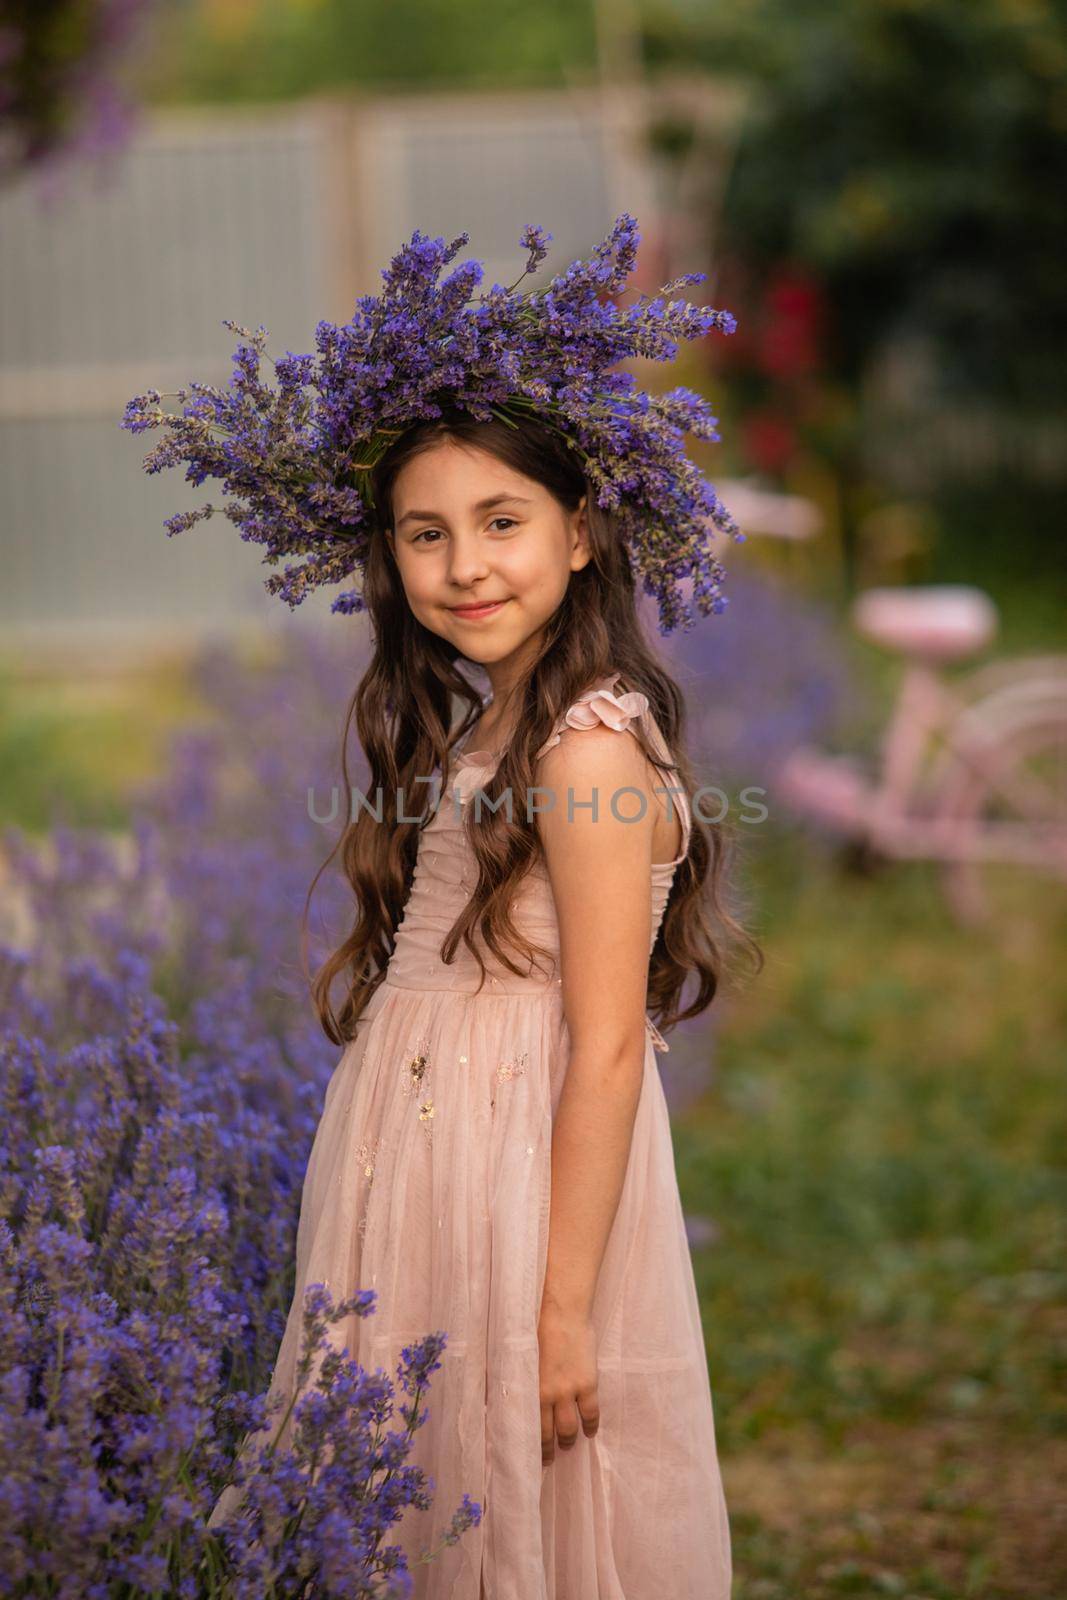 Beautiful long hair girl near lavender bushes at the garden. The girl made a wreath from the flowers